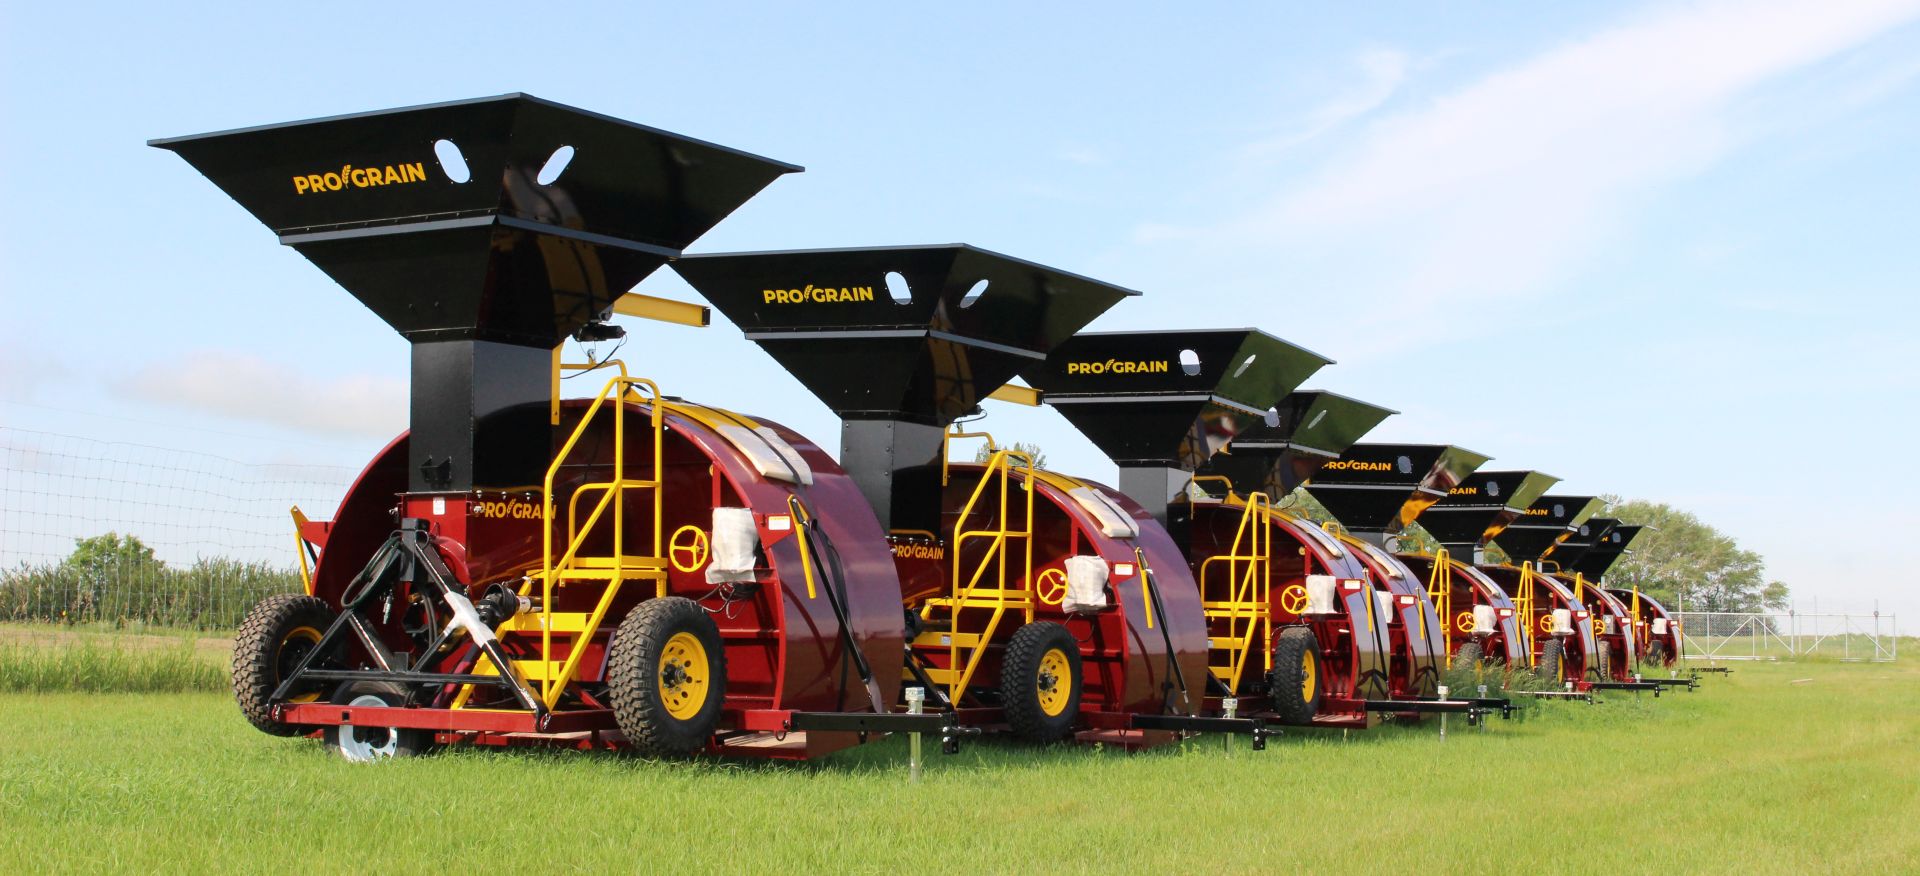 Pro Grain Grain baggers lined up in a row